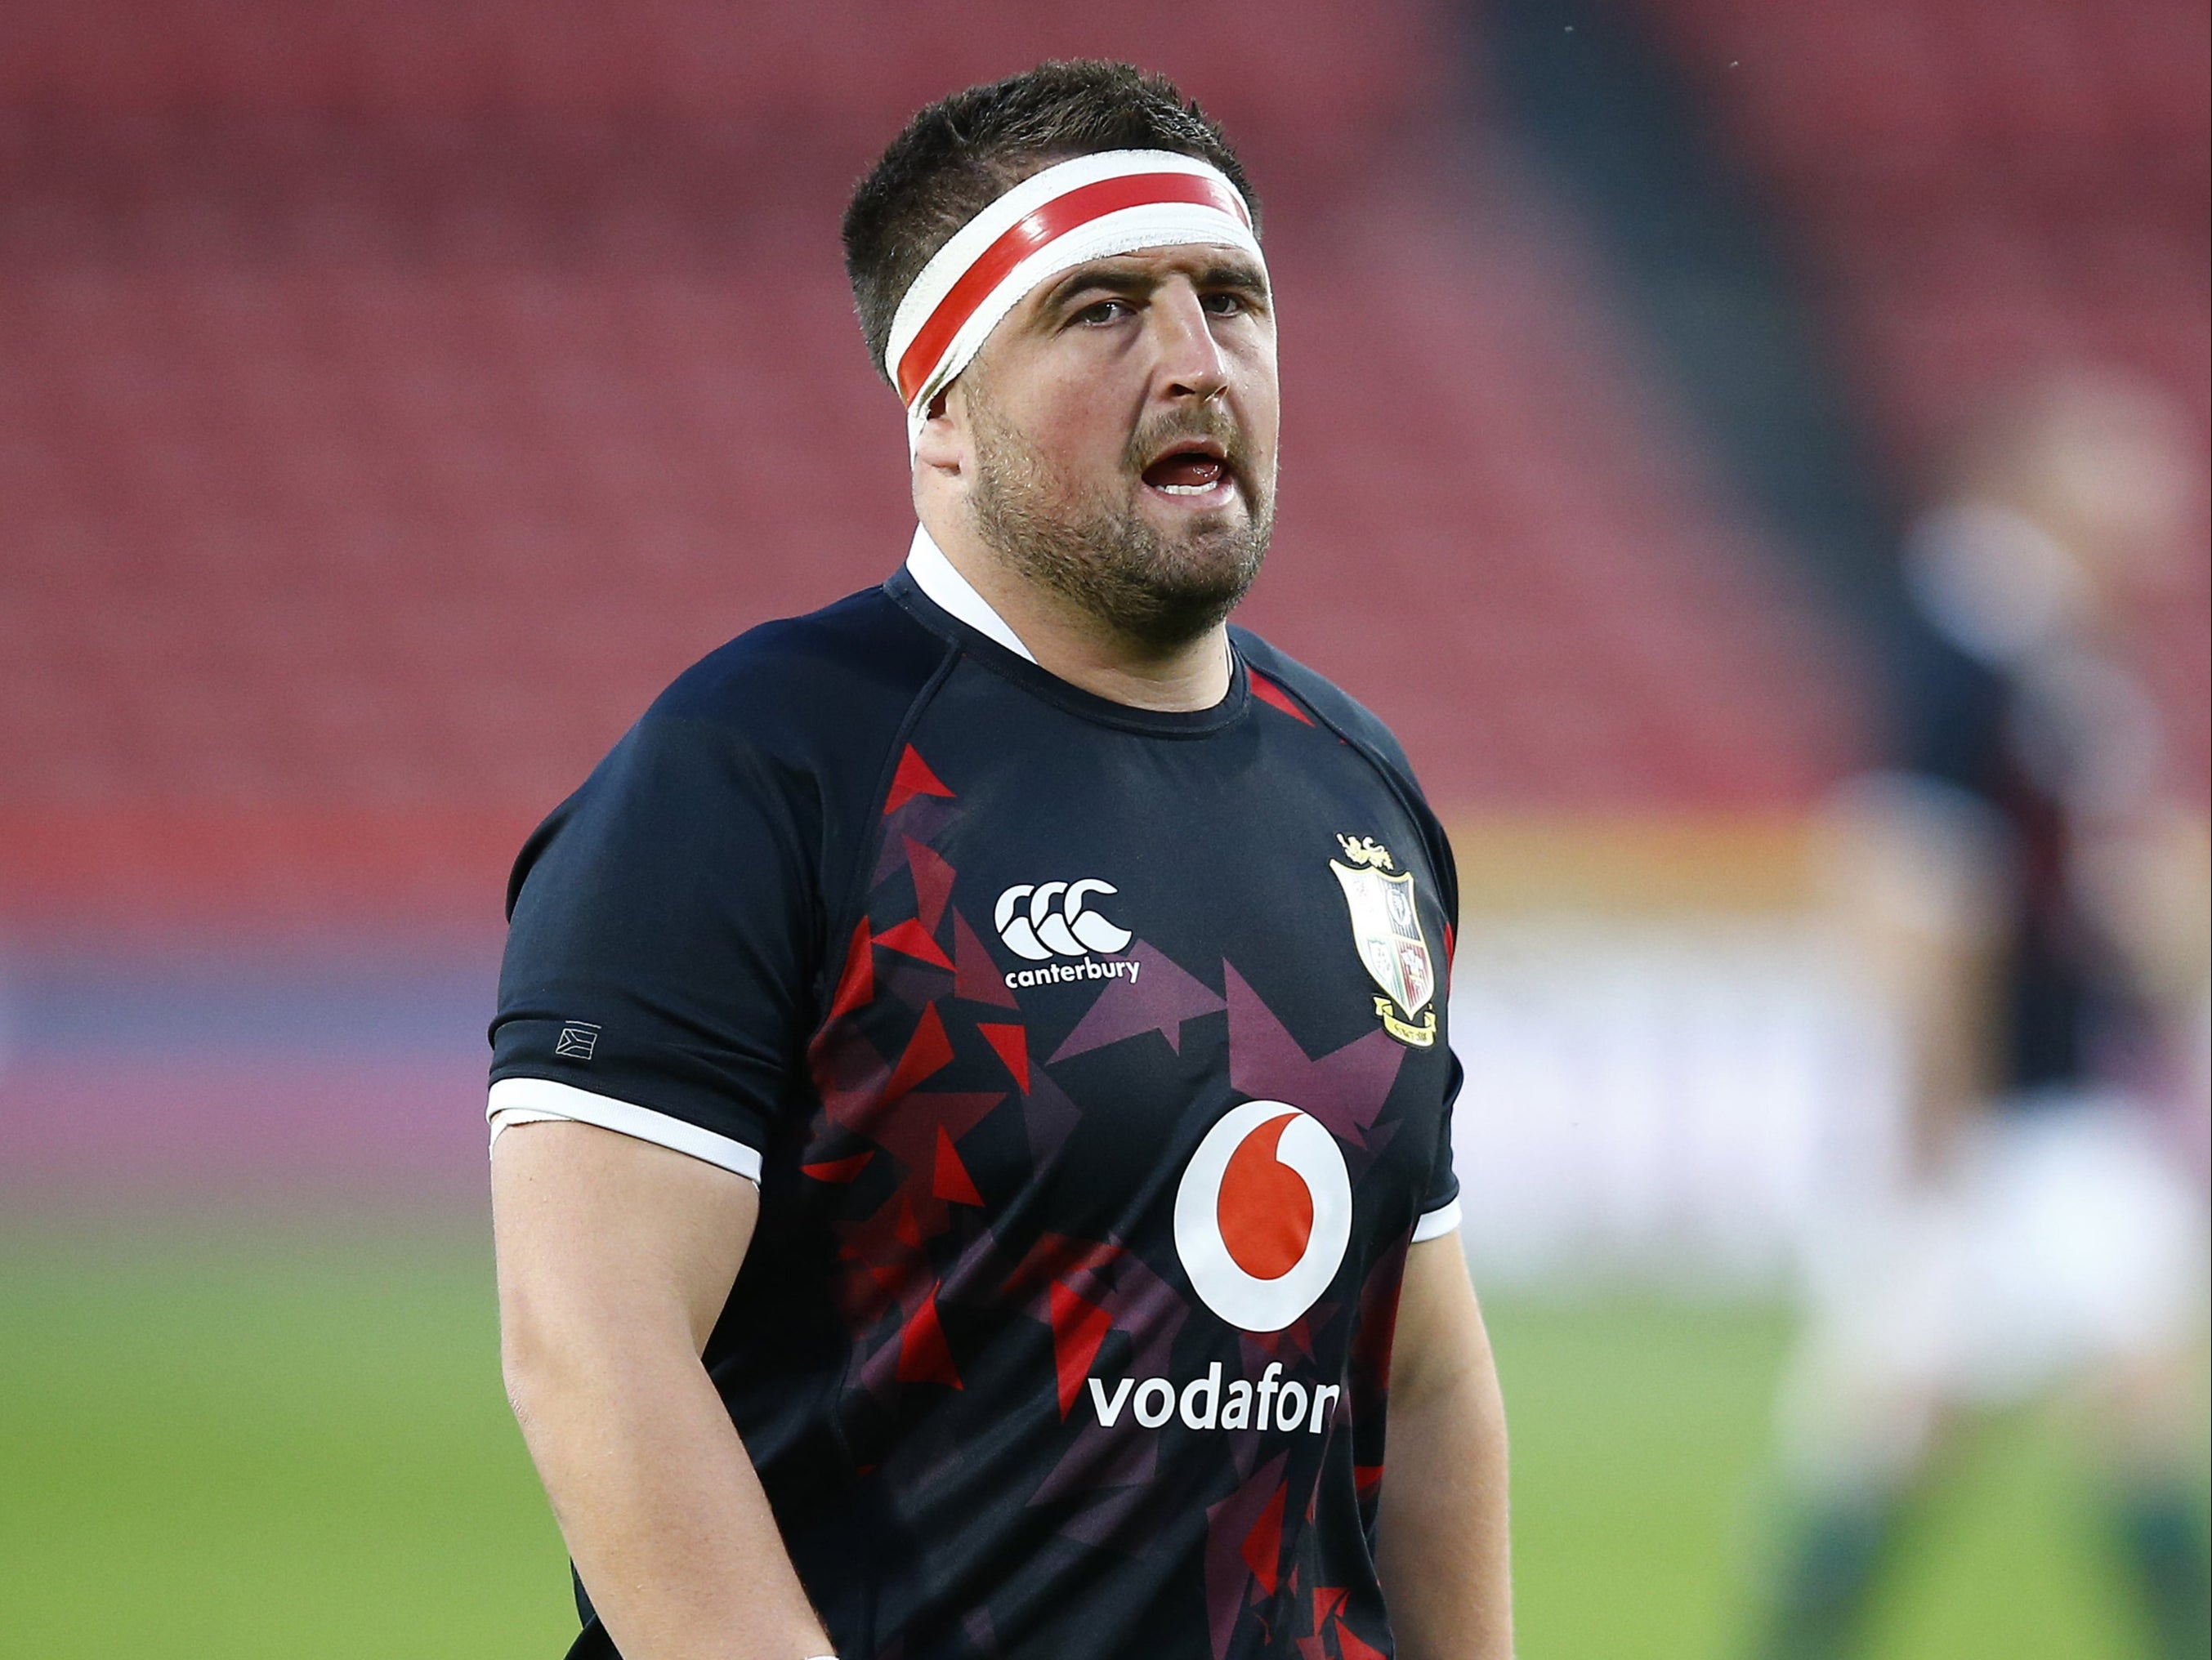 Wyn Jones ha sustained a shoulder injury and misses the first Test against South Africa (Steve Haag/PA)